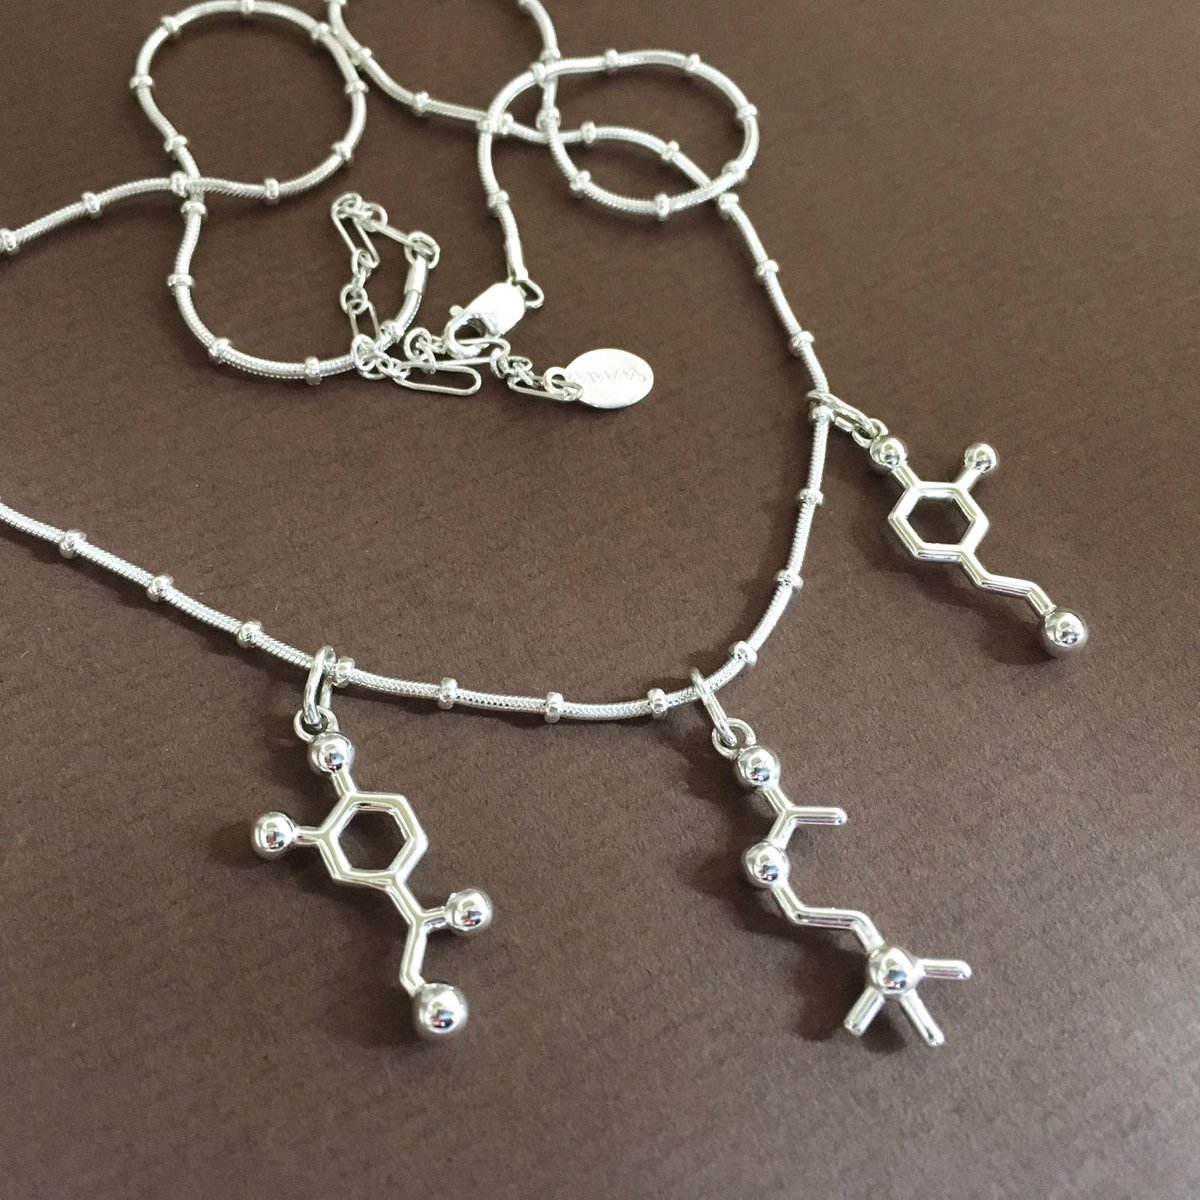 Image of focus necklace